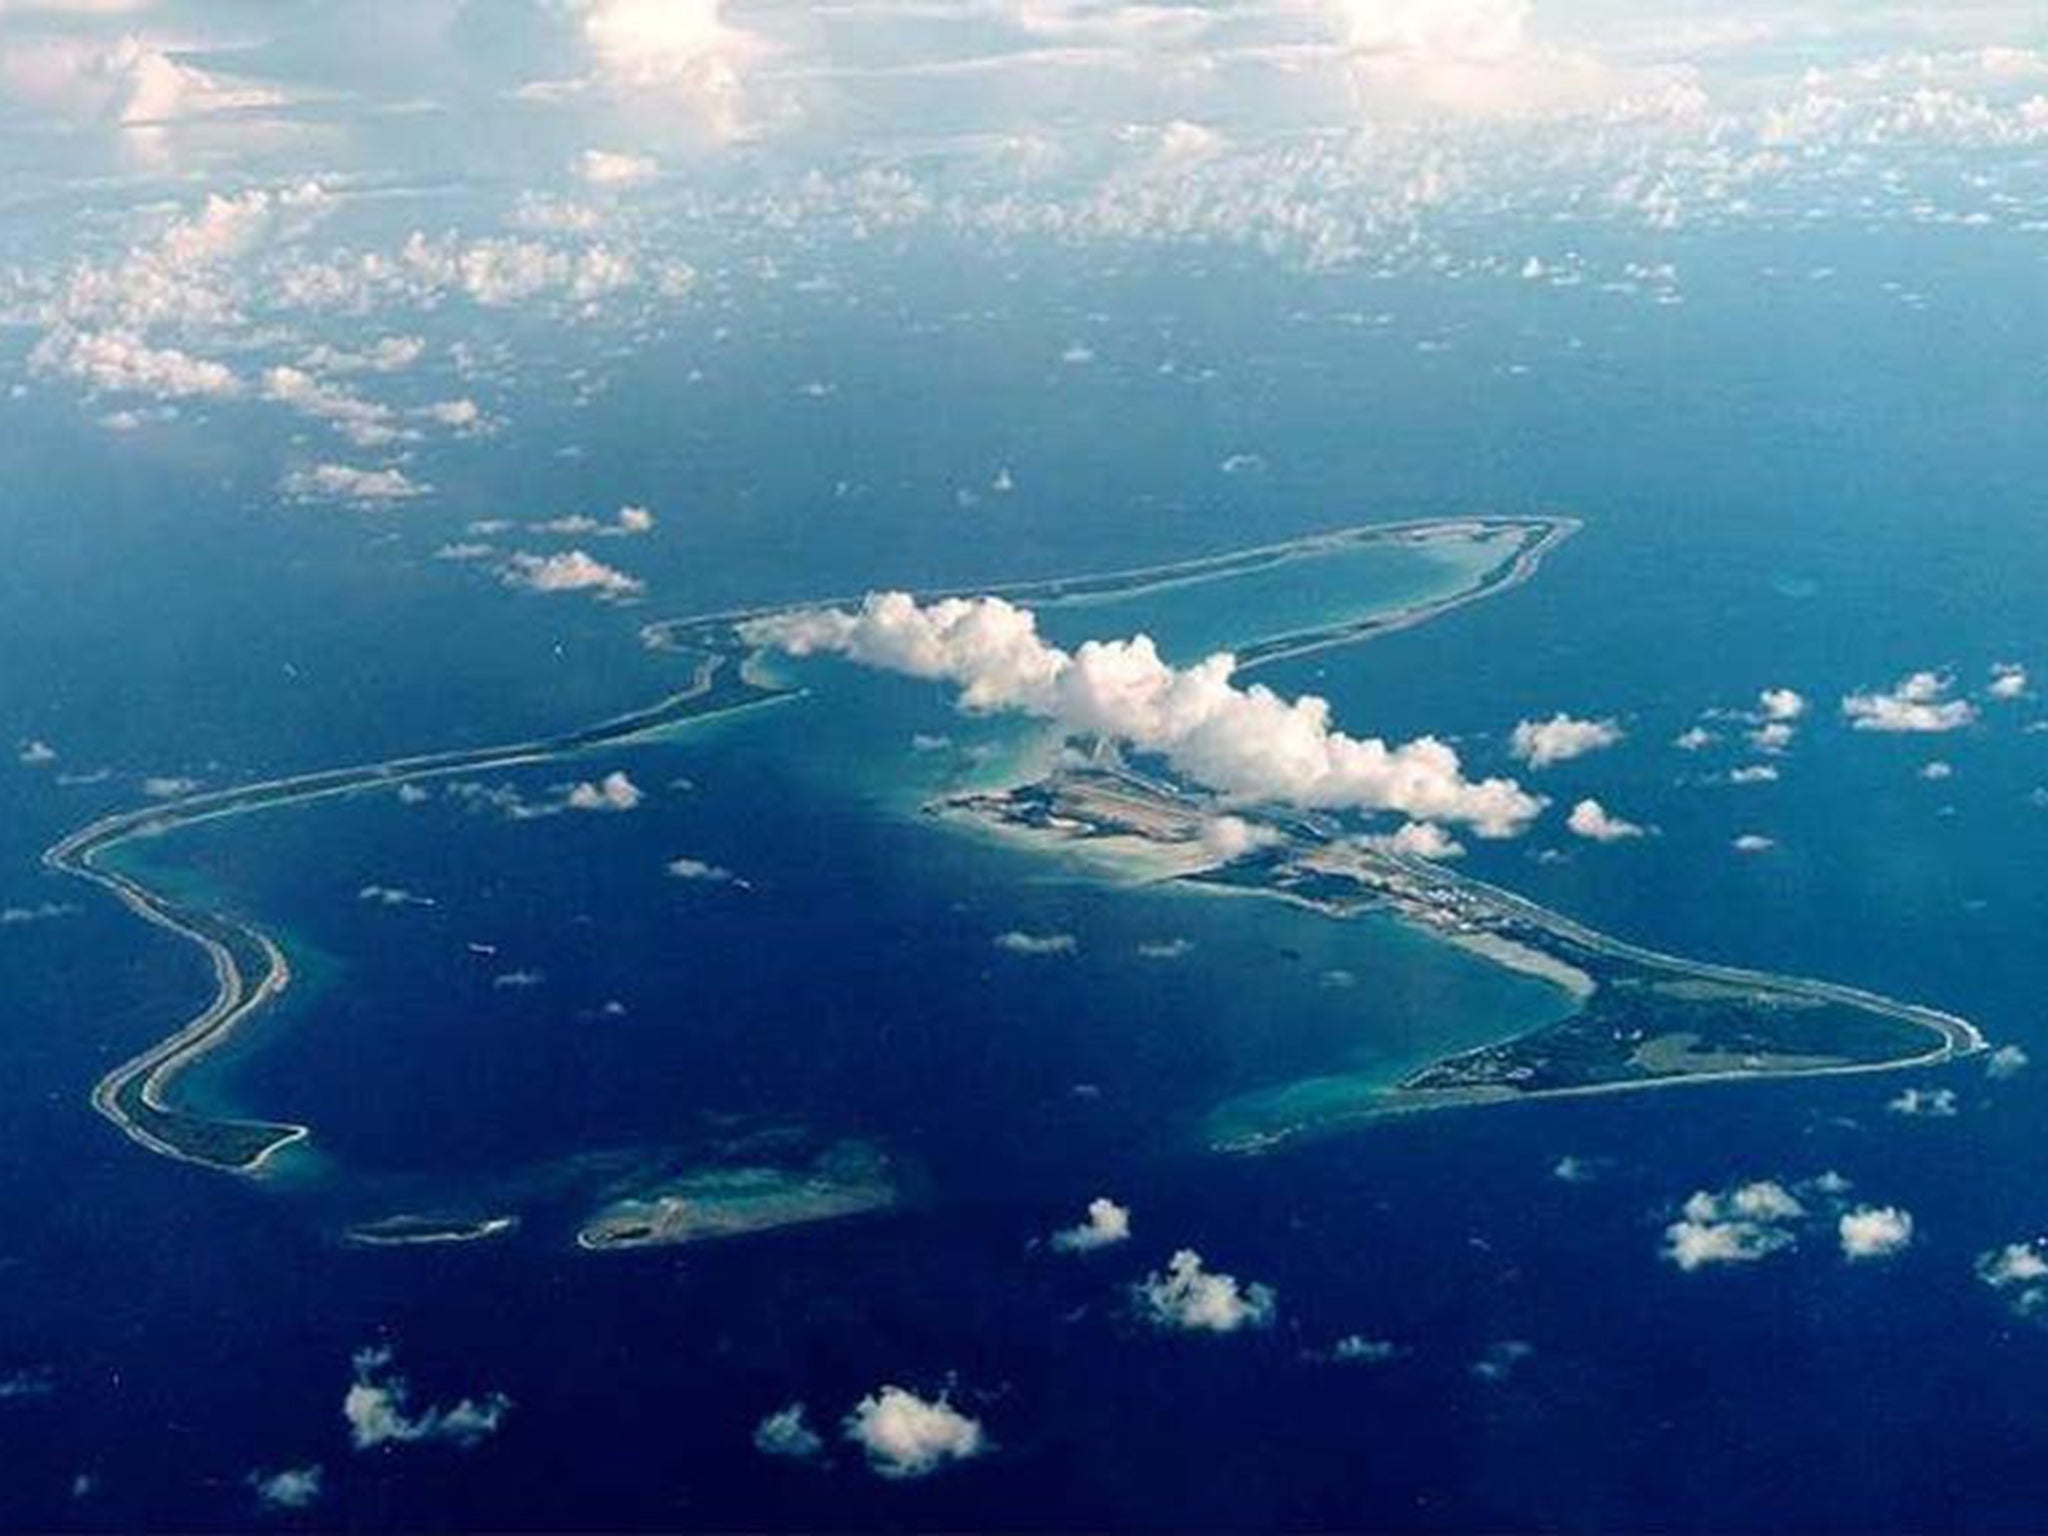 Diego Garcia, the largest island in the Chagos archipelago in the Indian Ocean, was leased by the
United States from the UK in 1966 and is the site of a major American military base